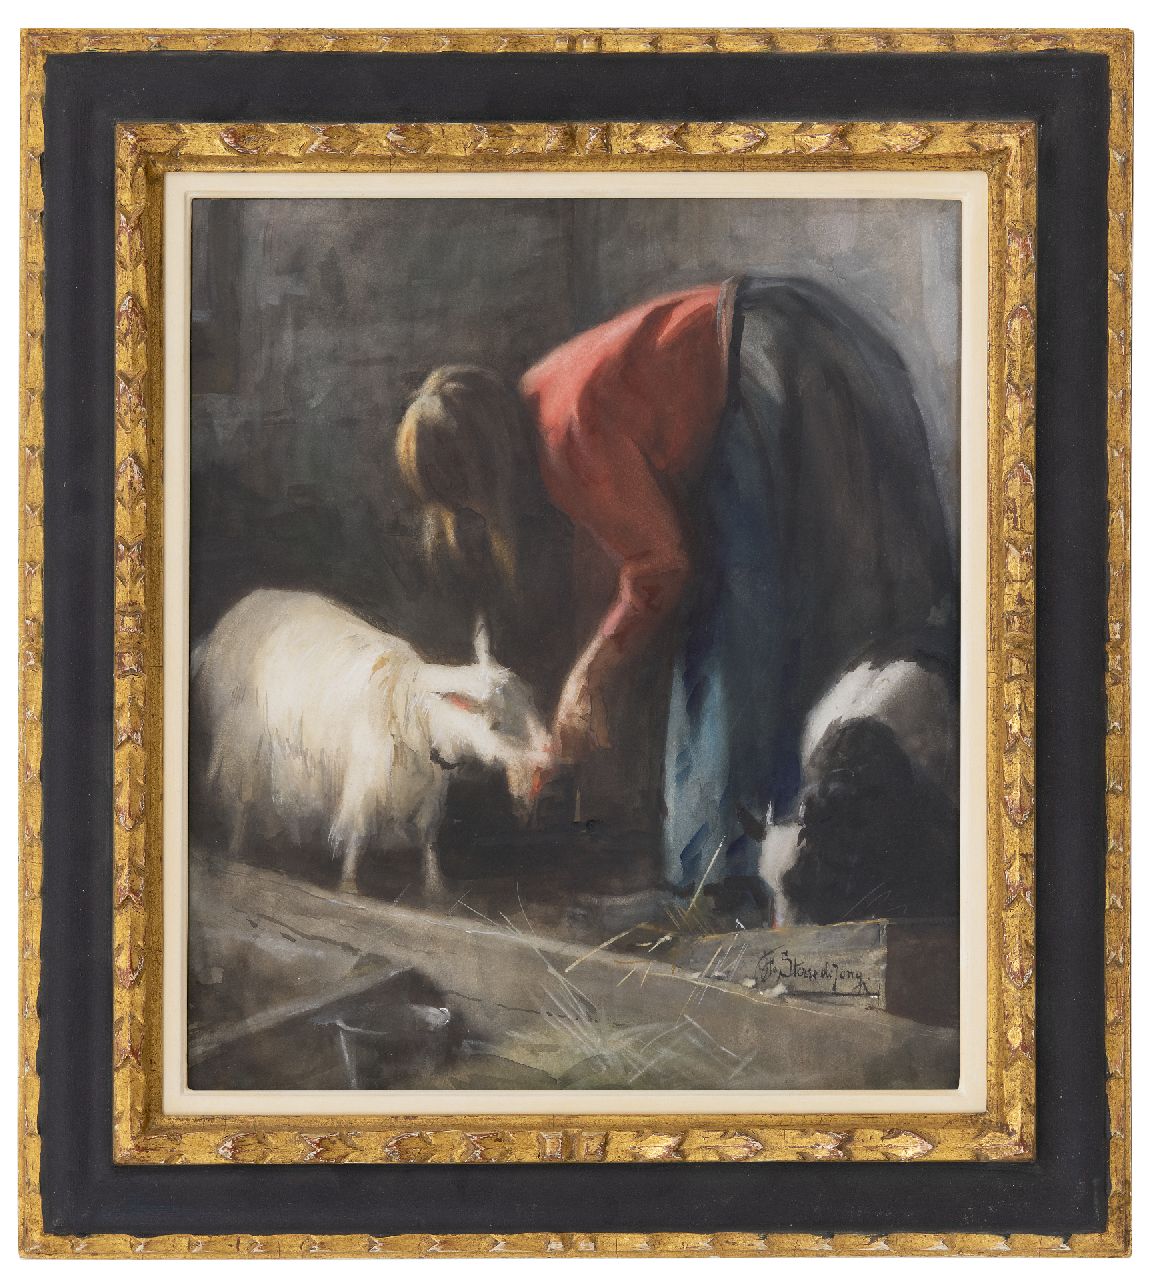 Sterre de Jong J.F.  | Jacobus Frederik Sterre de Jong | Watercolours and drawings offered for sale | Feeding the goat, watercolour on paper 42.6 x 37.0 cm, signed l.r.